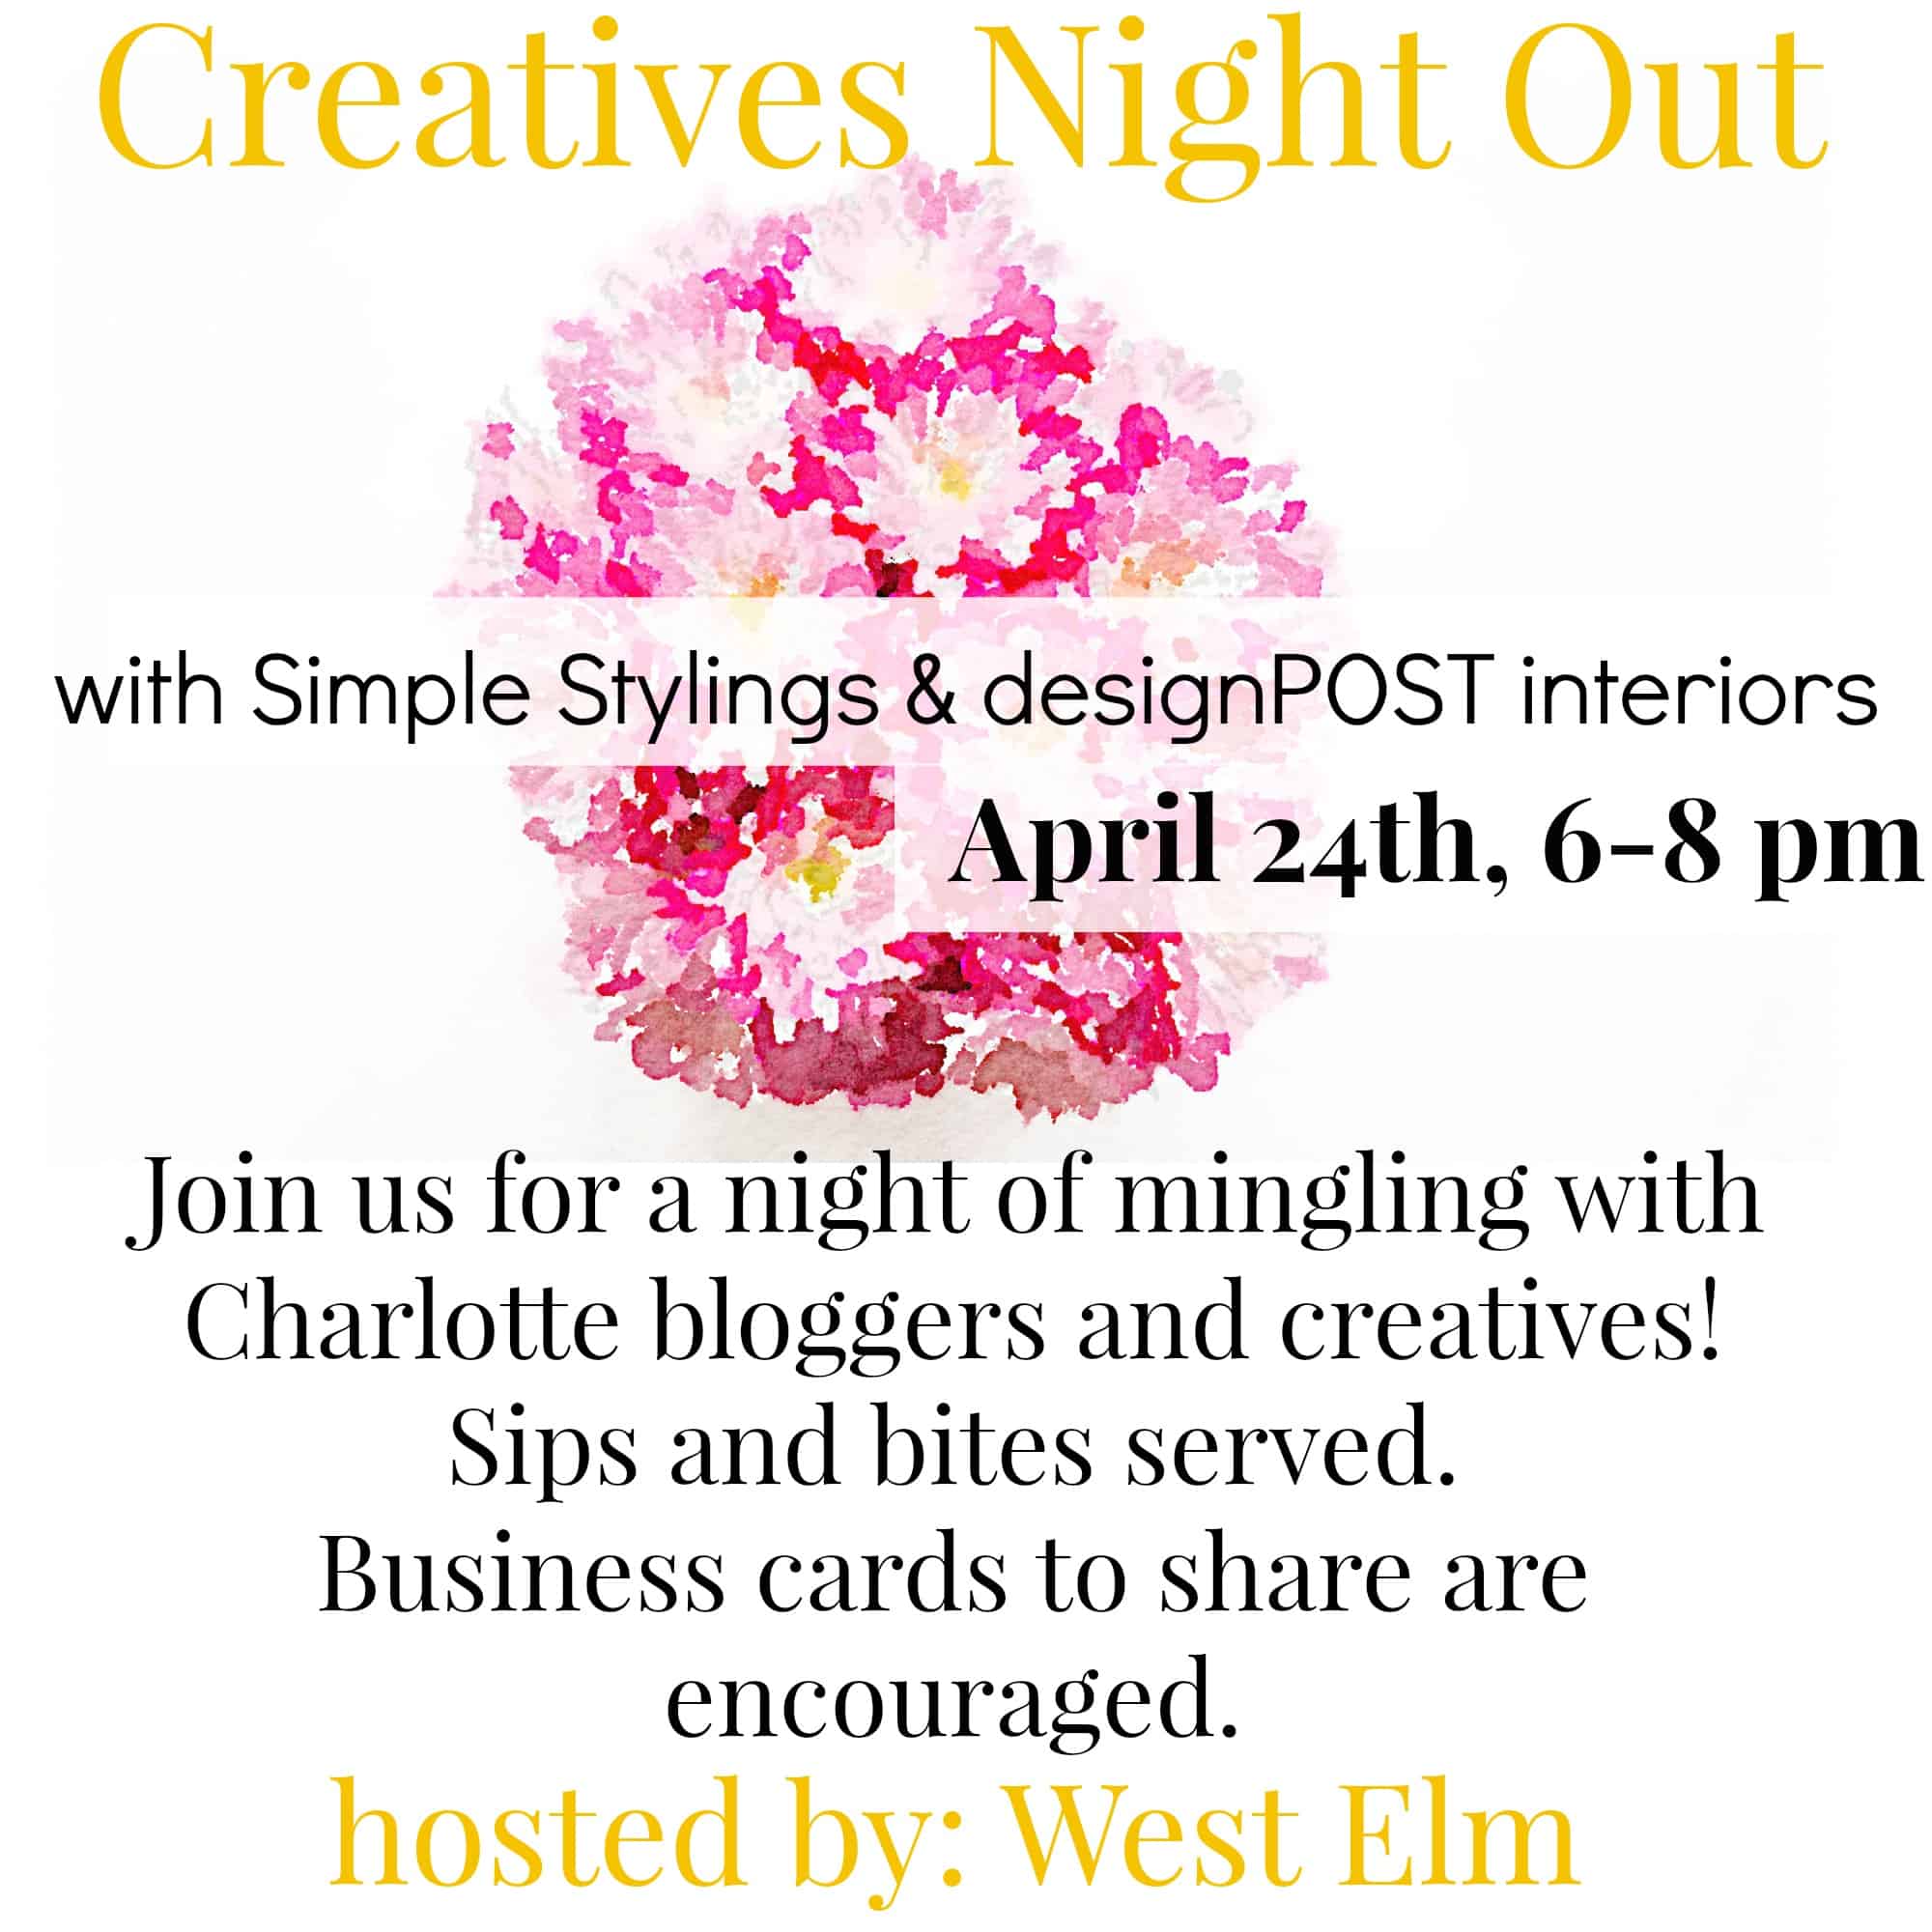 Creatives Night Out at West Elm